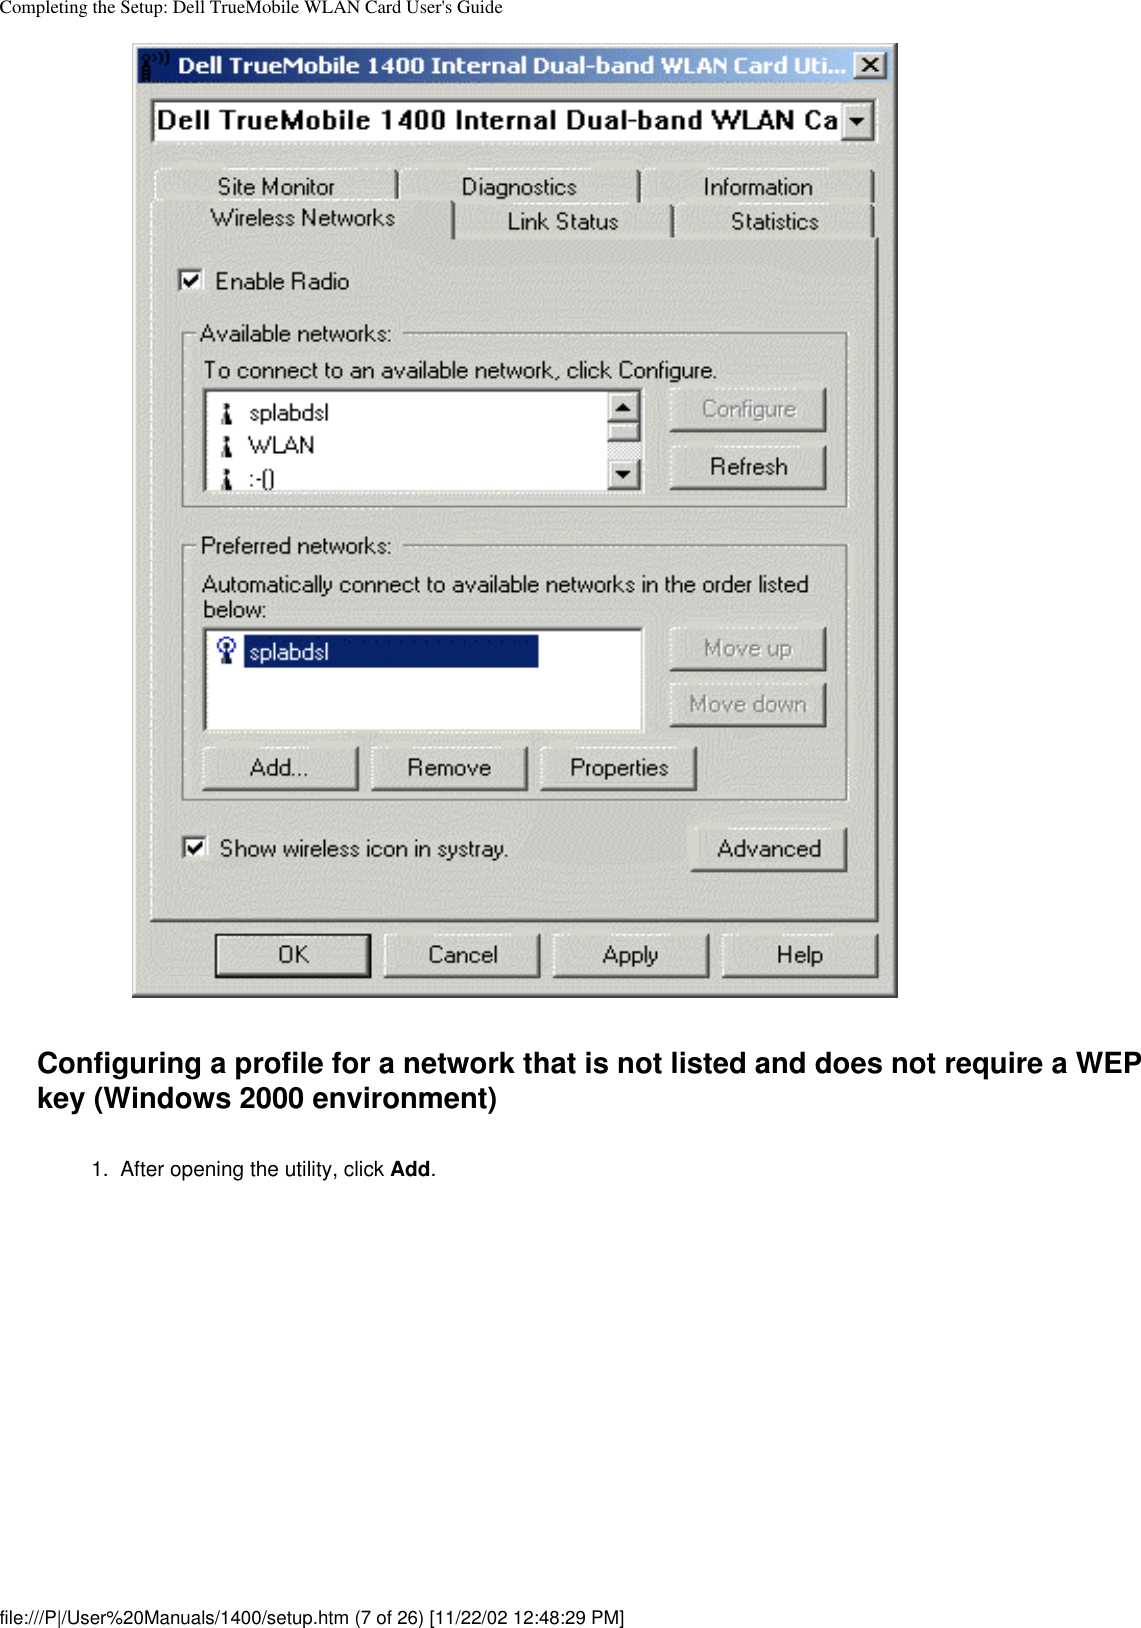 Completing the Setup: Dell TrueMobile WLAN Card User&apos;s GuideConfiguring a profile for a network that is not listed and does not require a WEP key (Windows 2000 environment)1.  After opening the utility, click Add. file:///P|/User%20Manuals/1400/setup.htm (7 of 26) [11/22/02 12:48:29 PM]